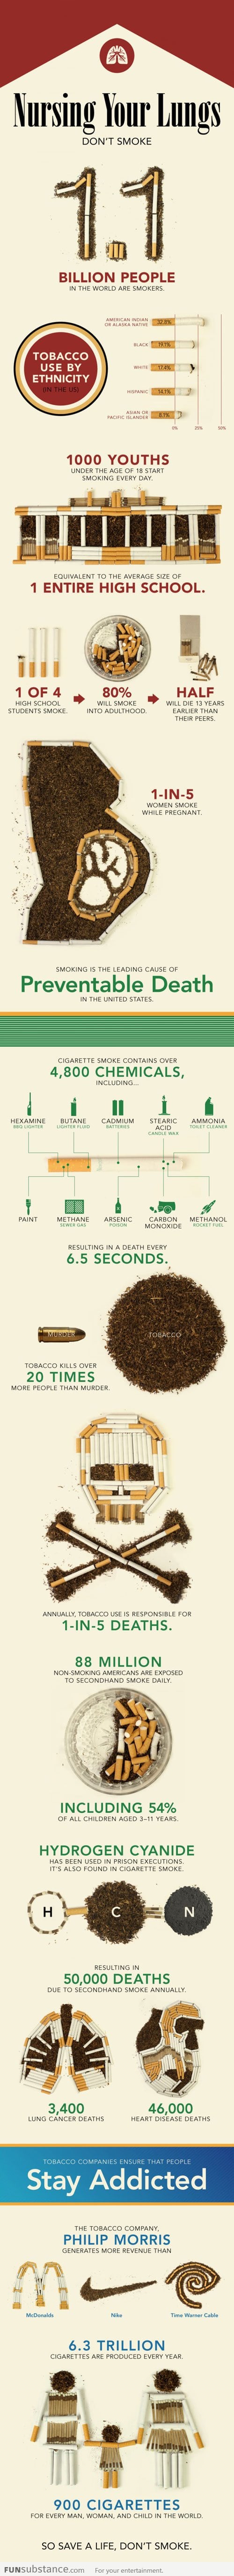 An Infographic About Smoking